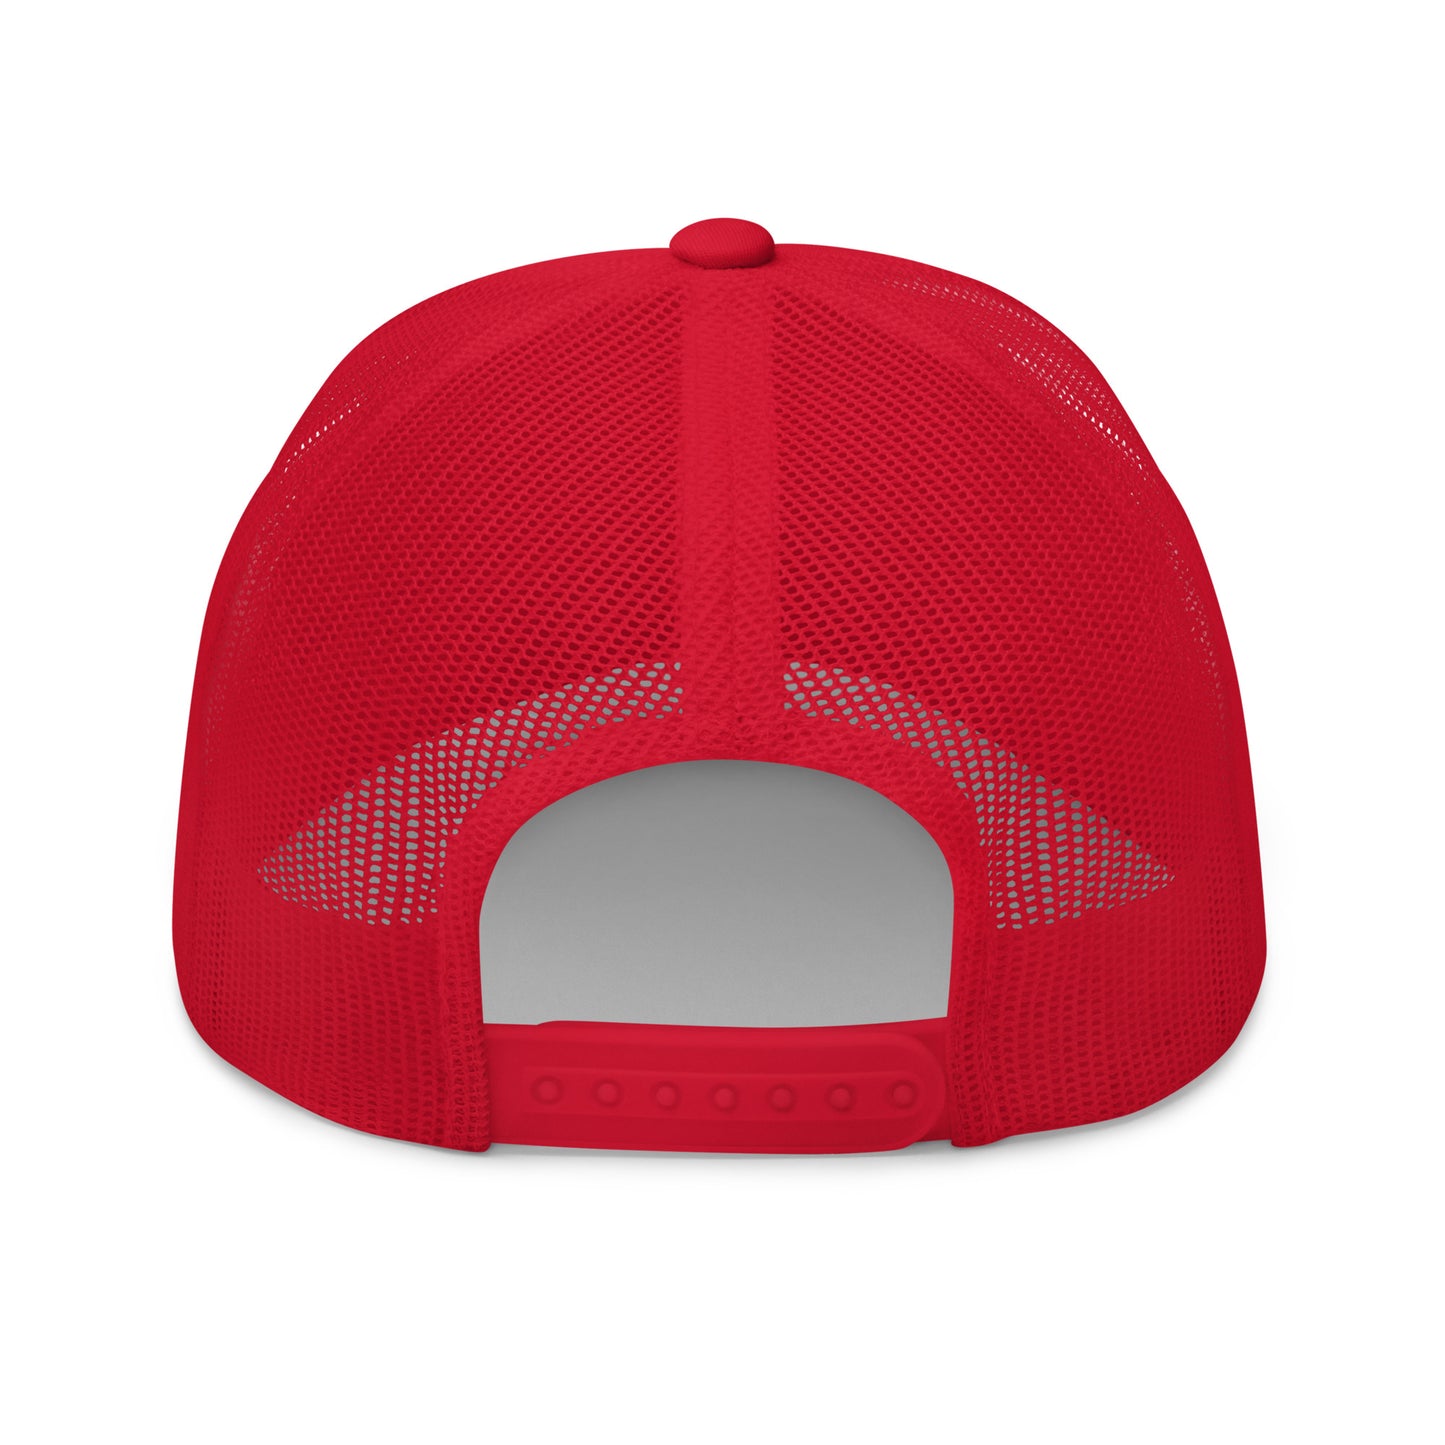 Maple Leaf Trucker Hat - Red/White • YYC Calgary • YHM Designs - Image 24